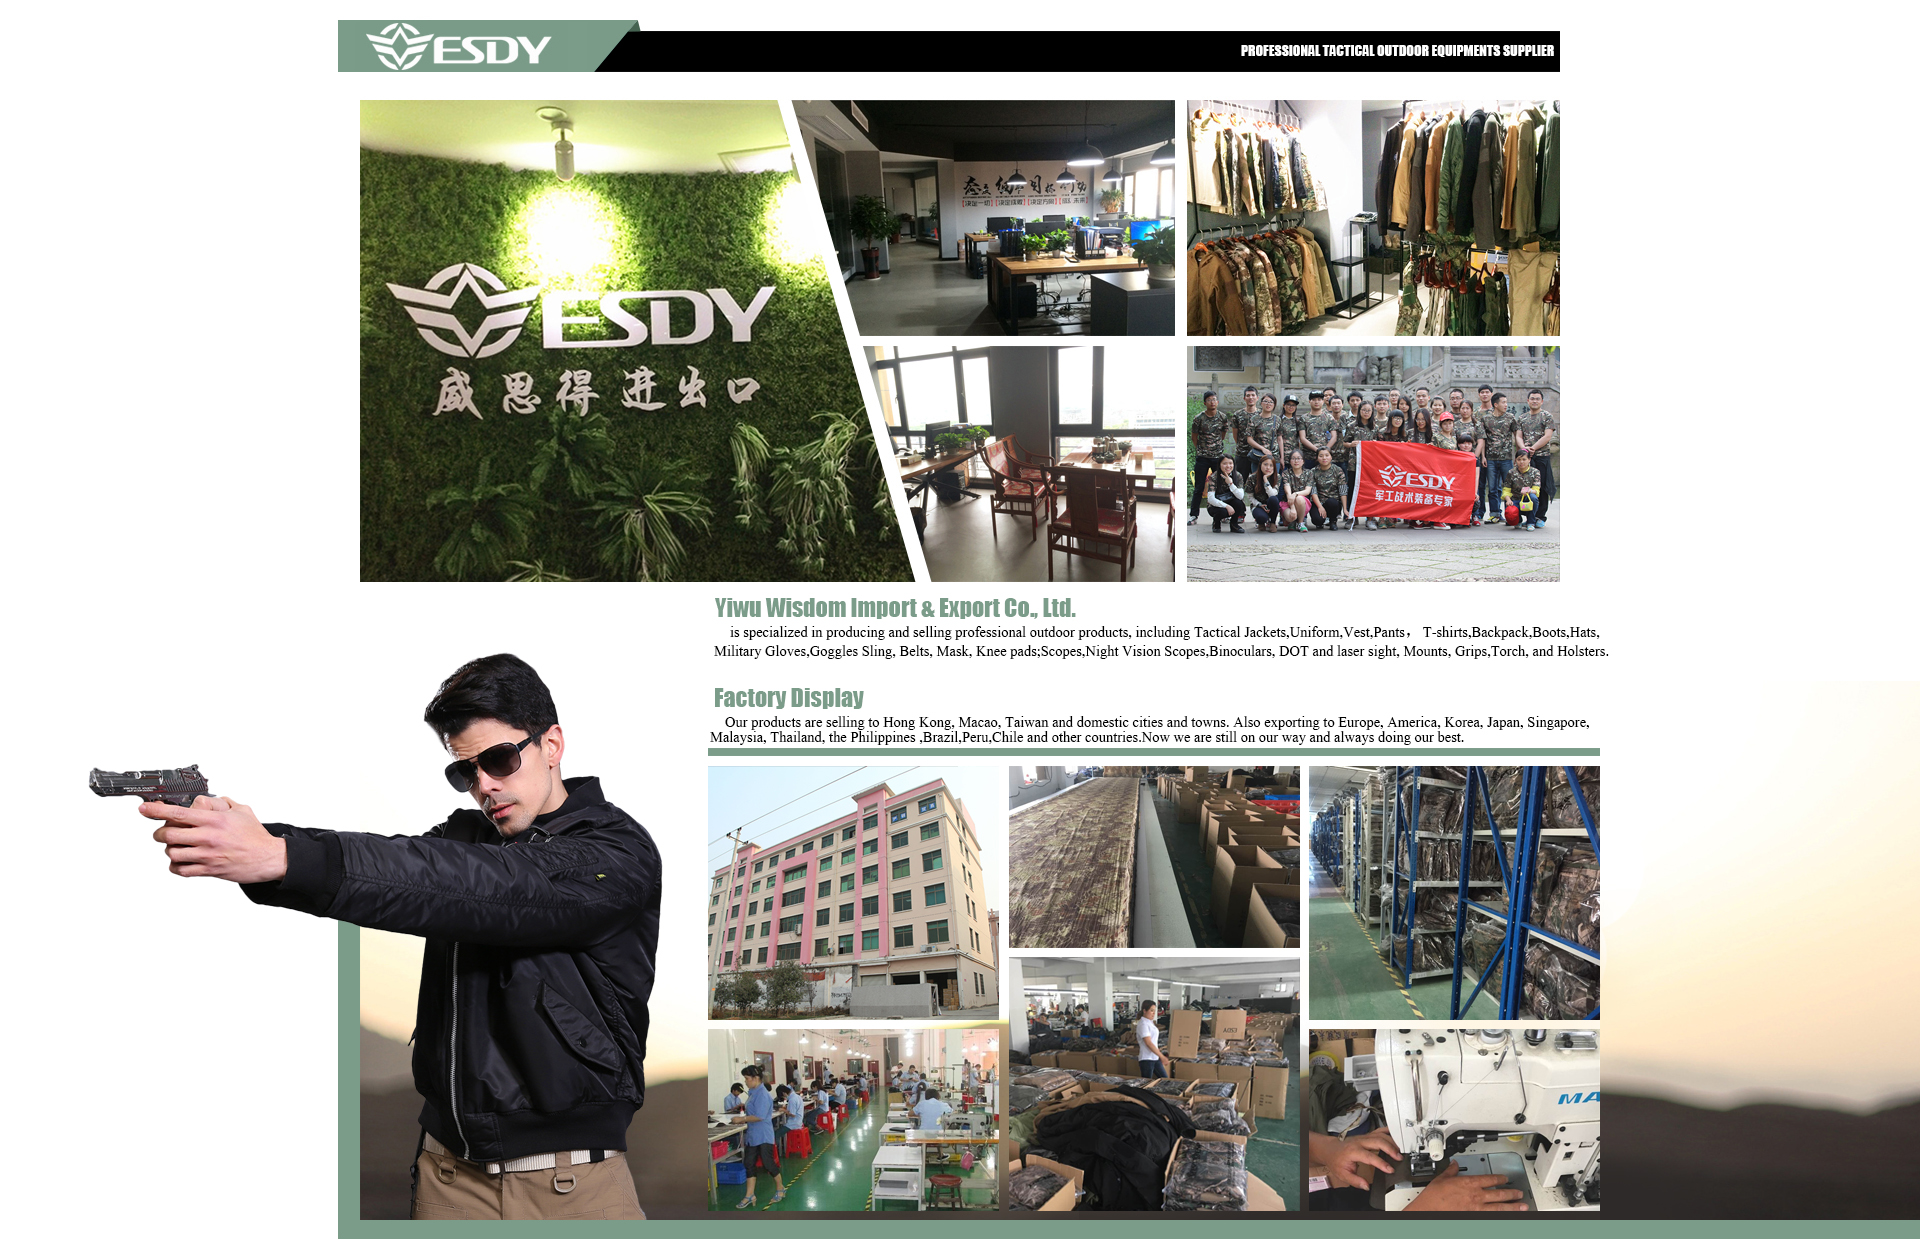 About Us – ESDY – Outdoor Equipment Manufacturer